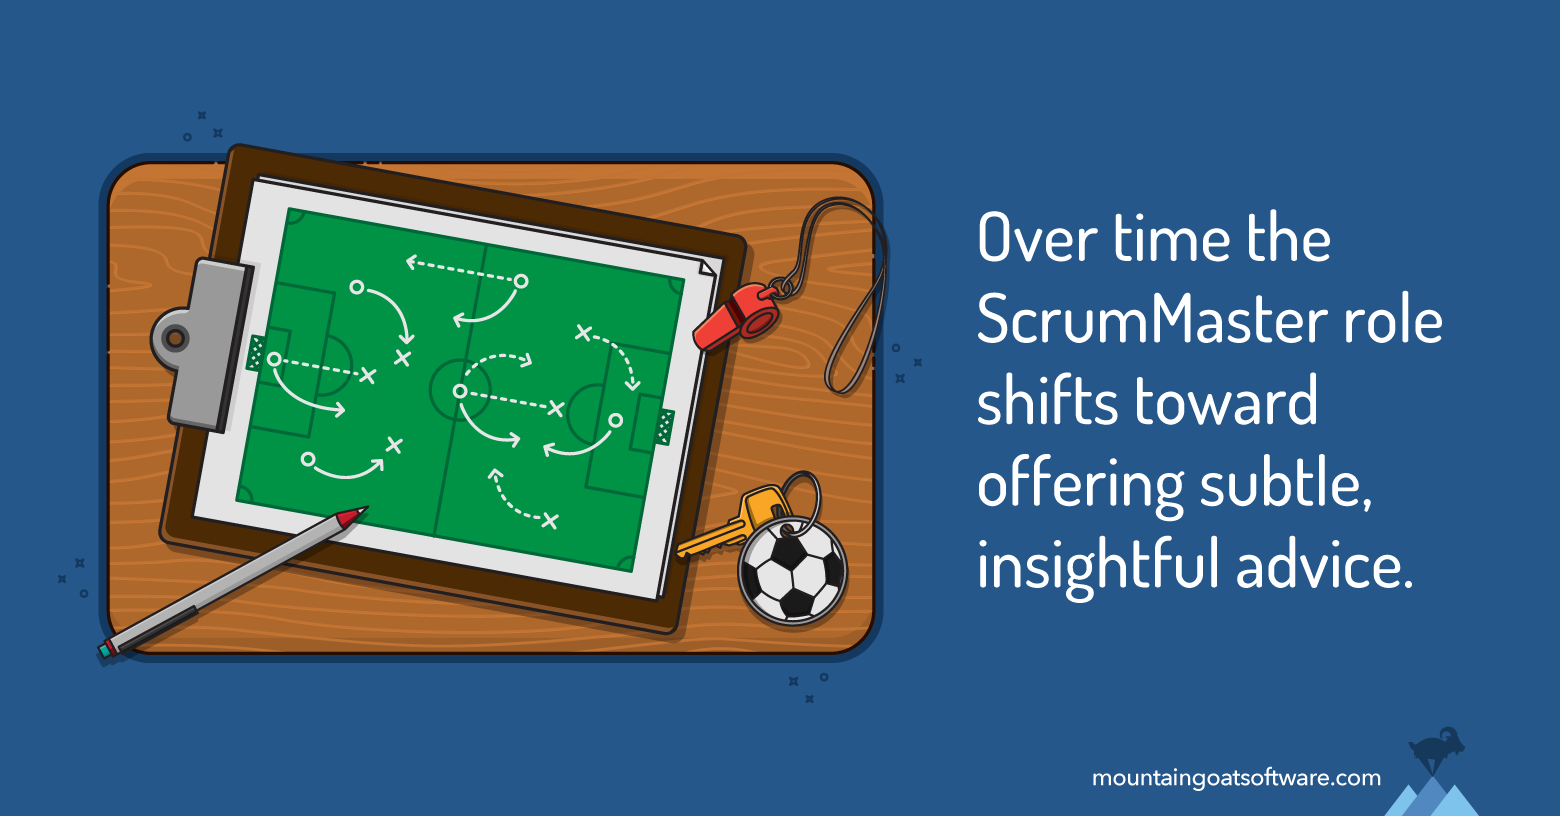 Does Being a Scrum Master Get Easier Over Time?